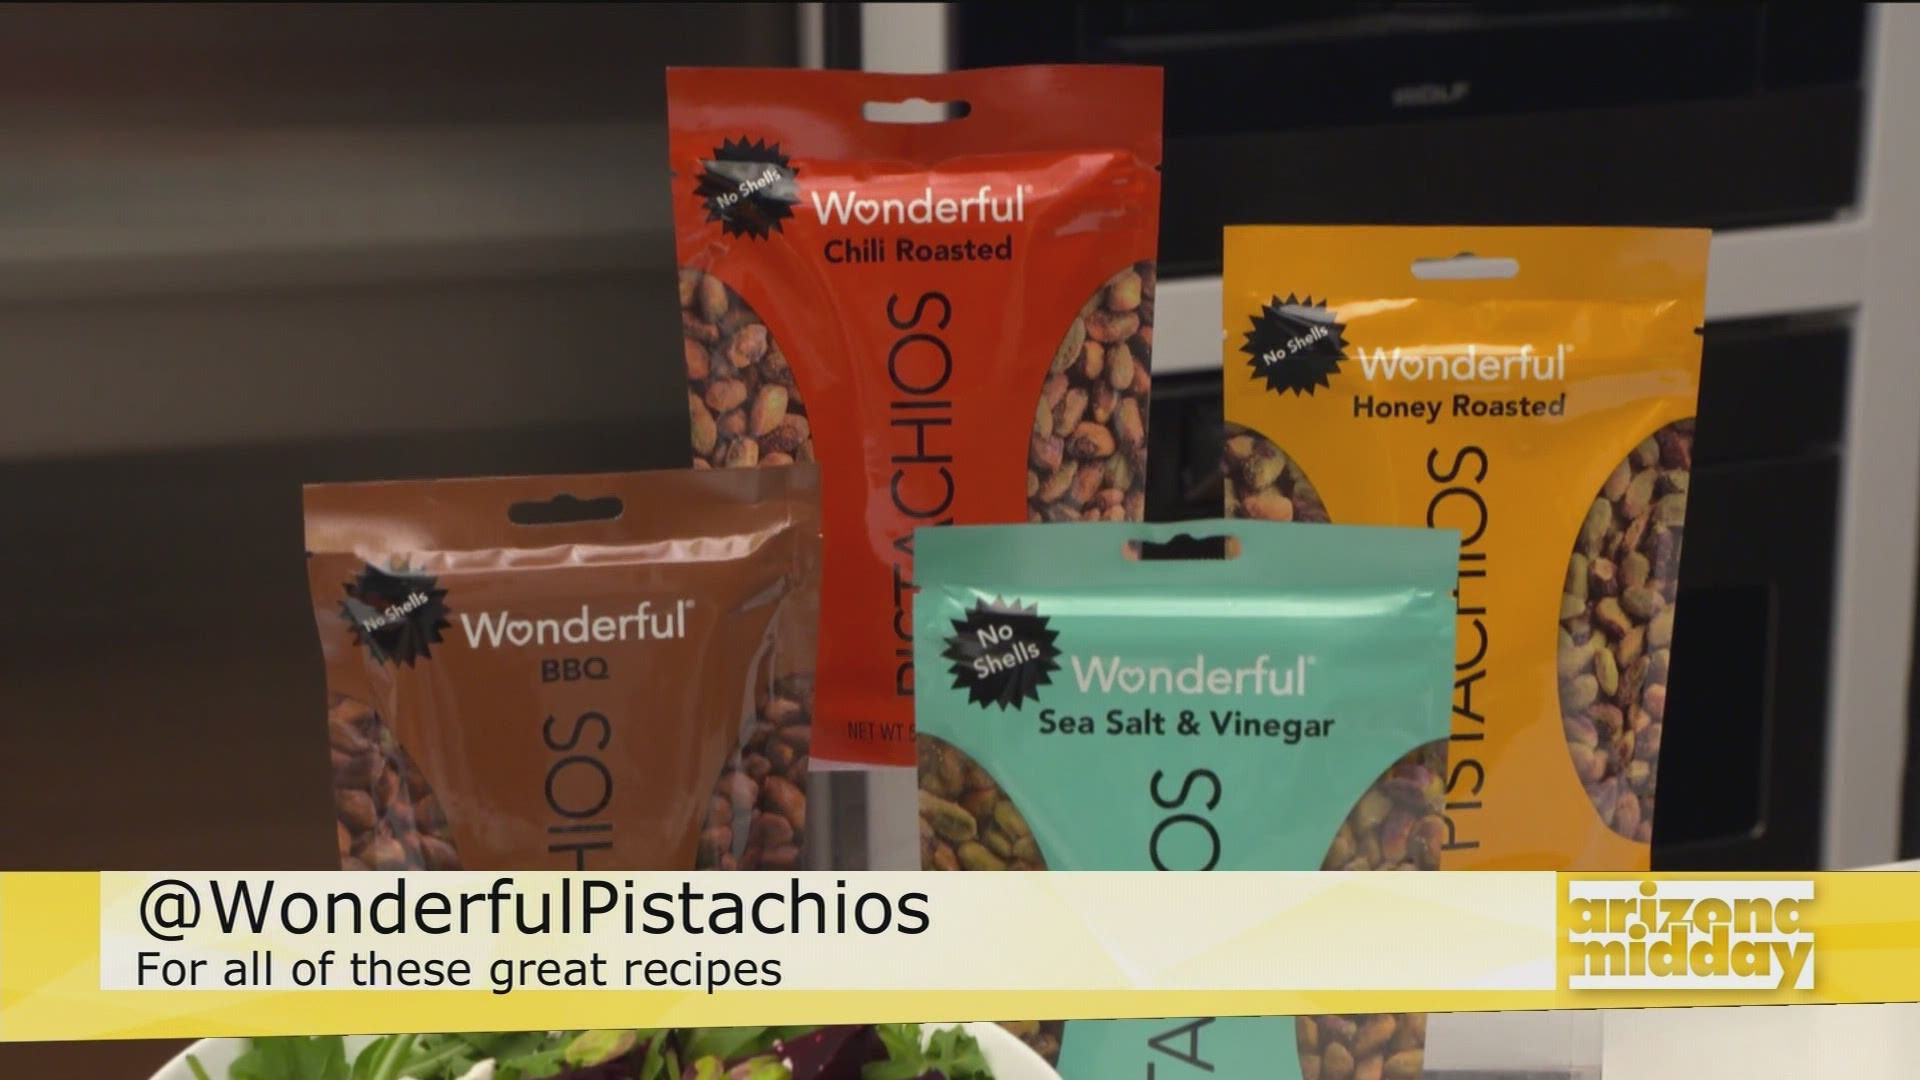 Vanessa Rissetto, Registered Dietitian & Co-Founder of Culina Health, shows us some simple recipes to try with Wonderful Pistachios